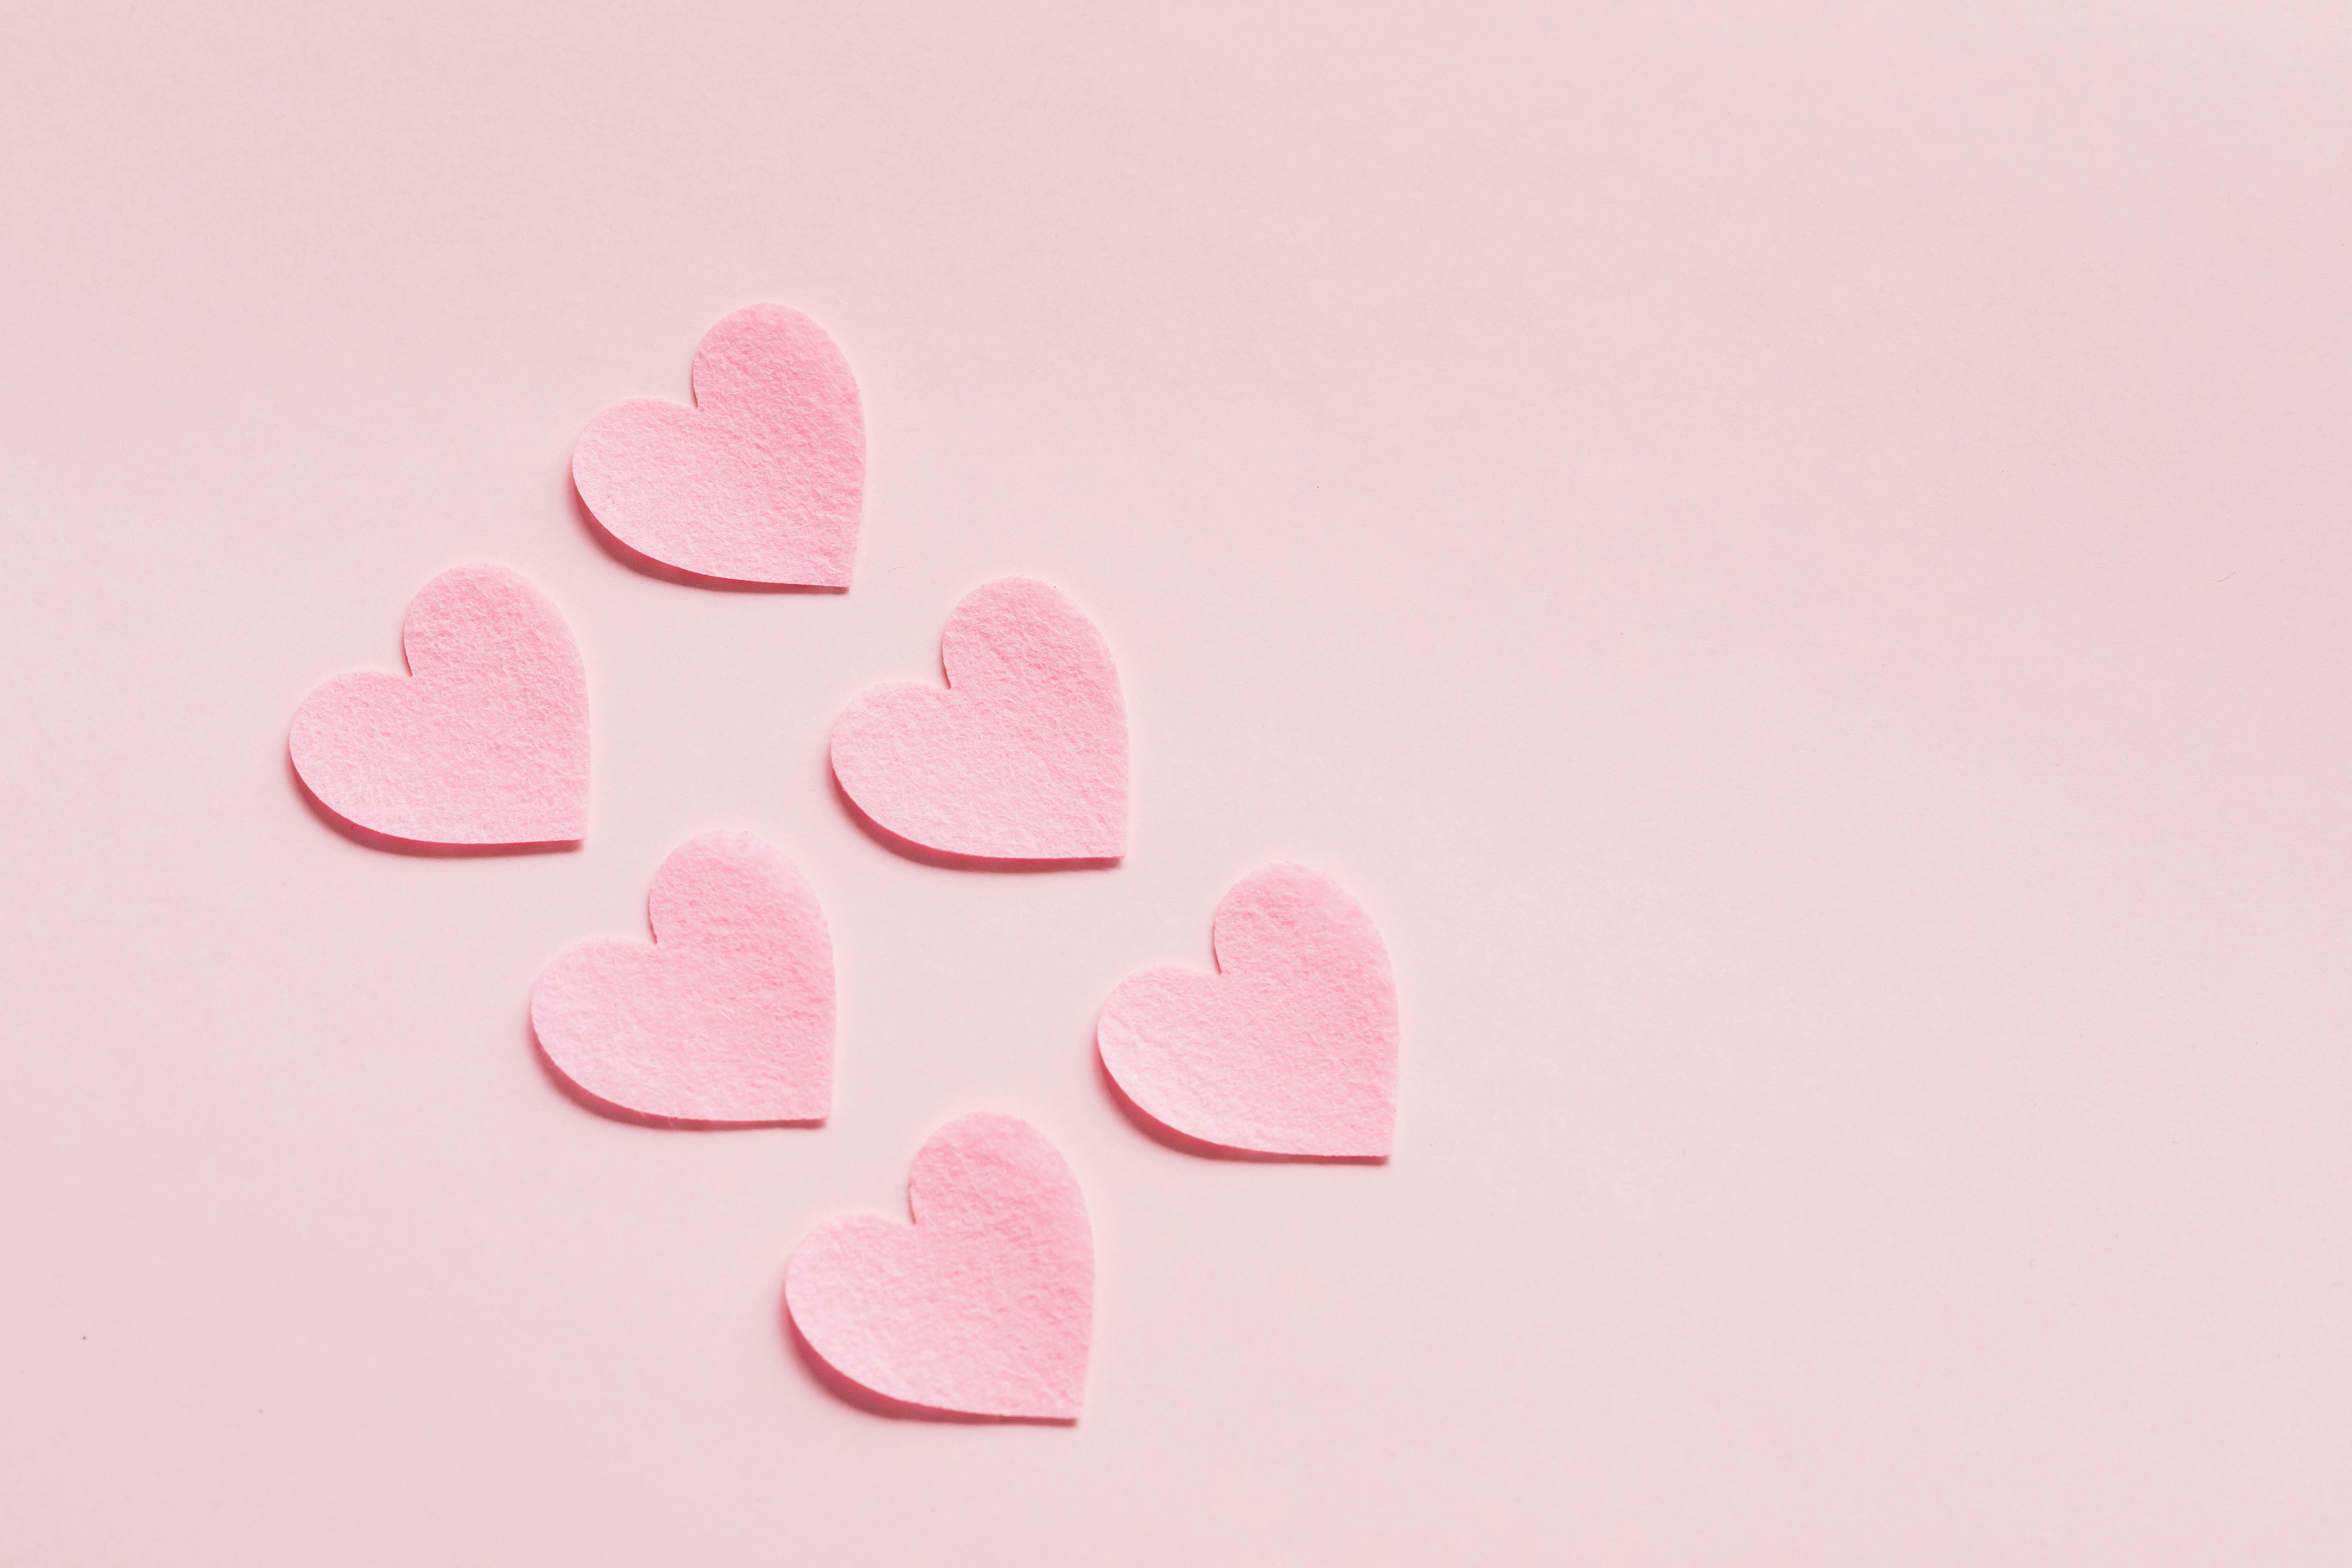 Heart shaped papers on pink background  Free Stock Photo